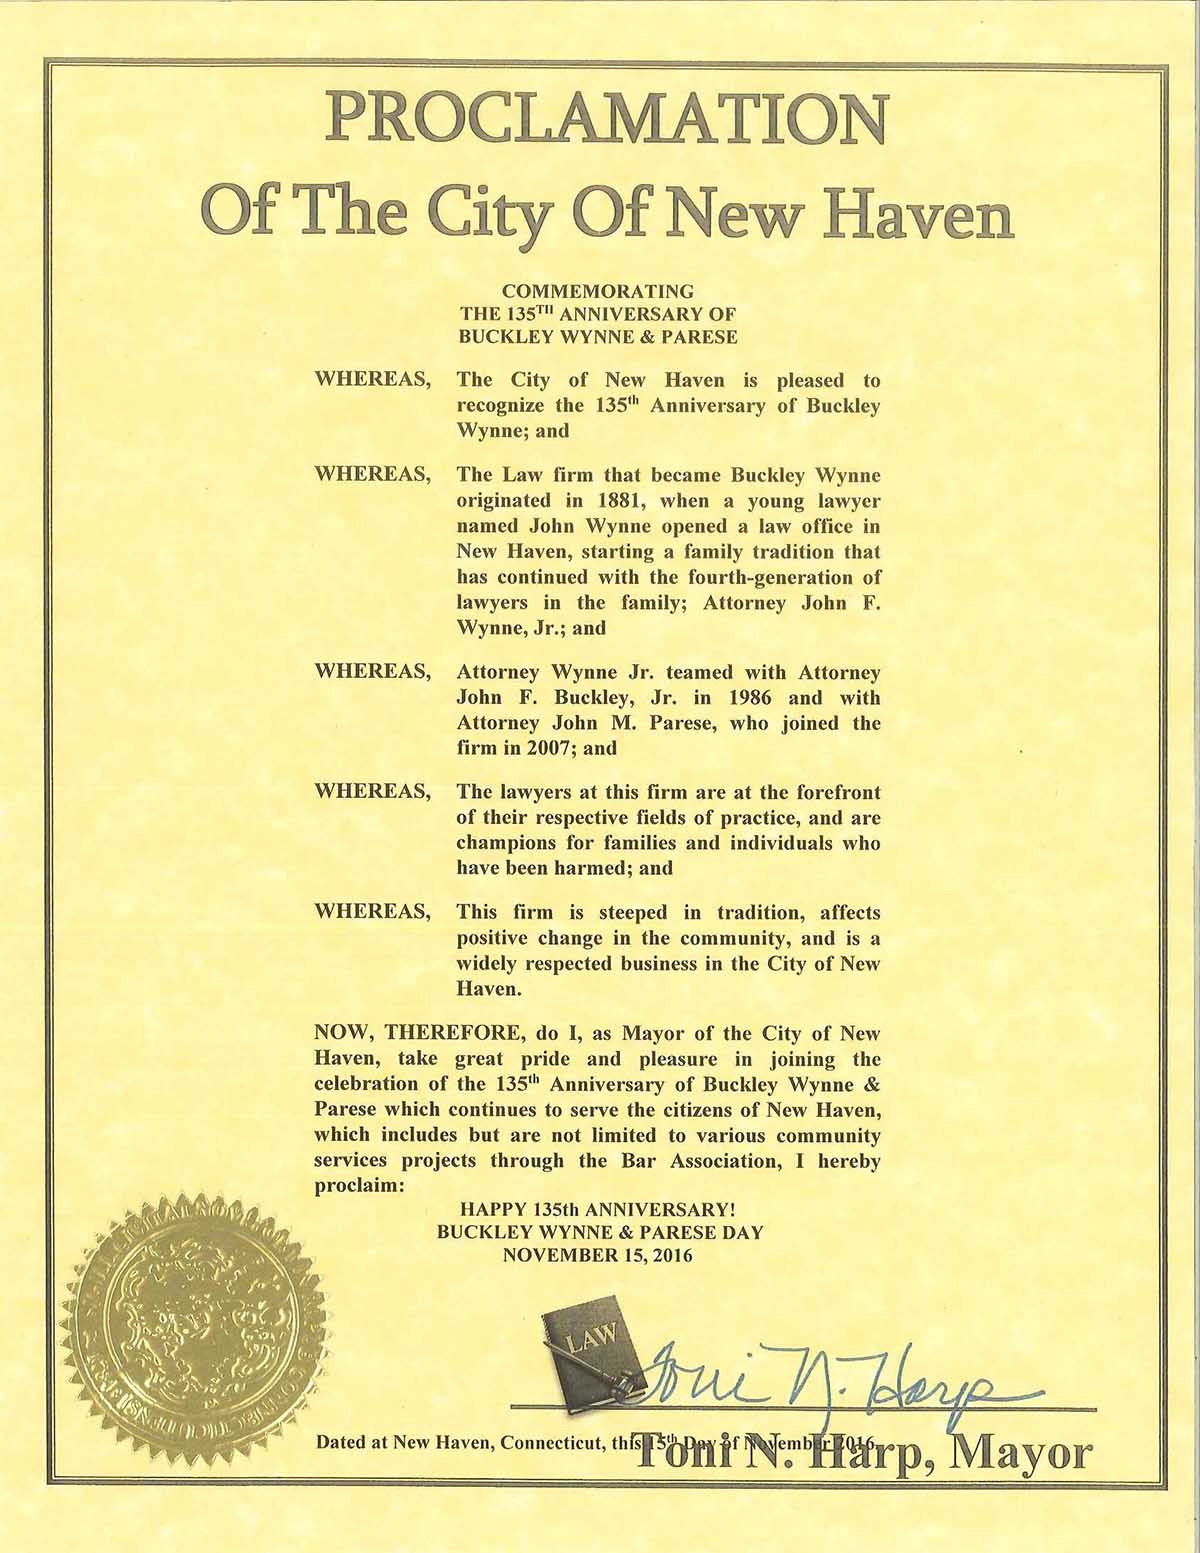 Proclomation of the City of New Haven BWP Day